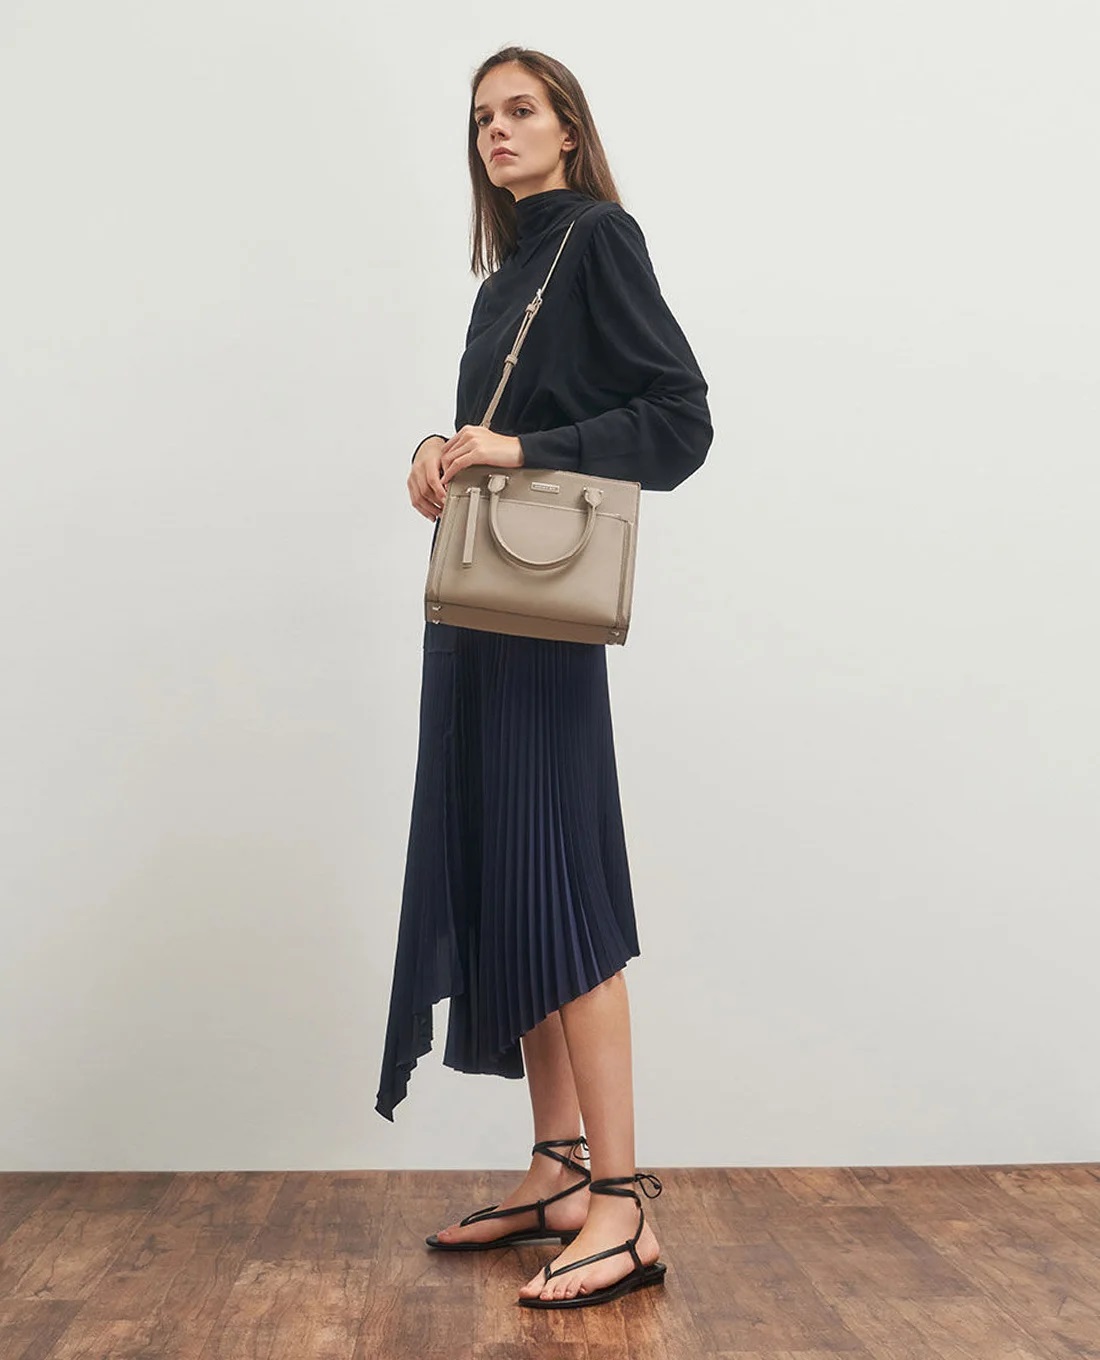 TÚI XÁCH CHARLES KEITH DOUBLE HANDLE FRONT ZIP TOTE BAG 19